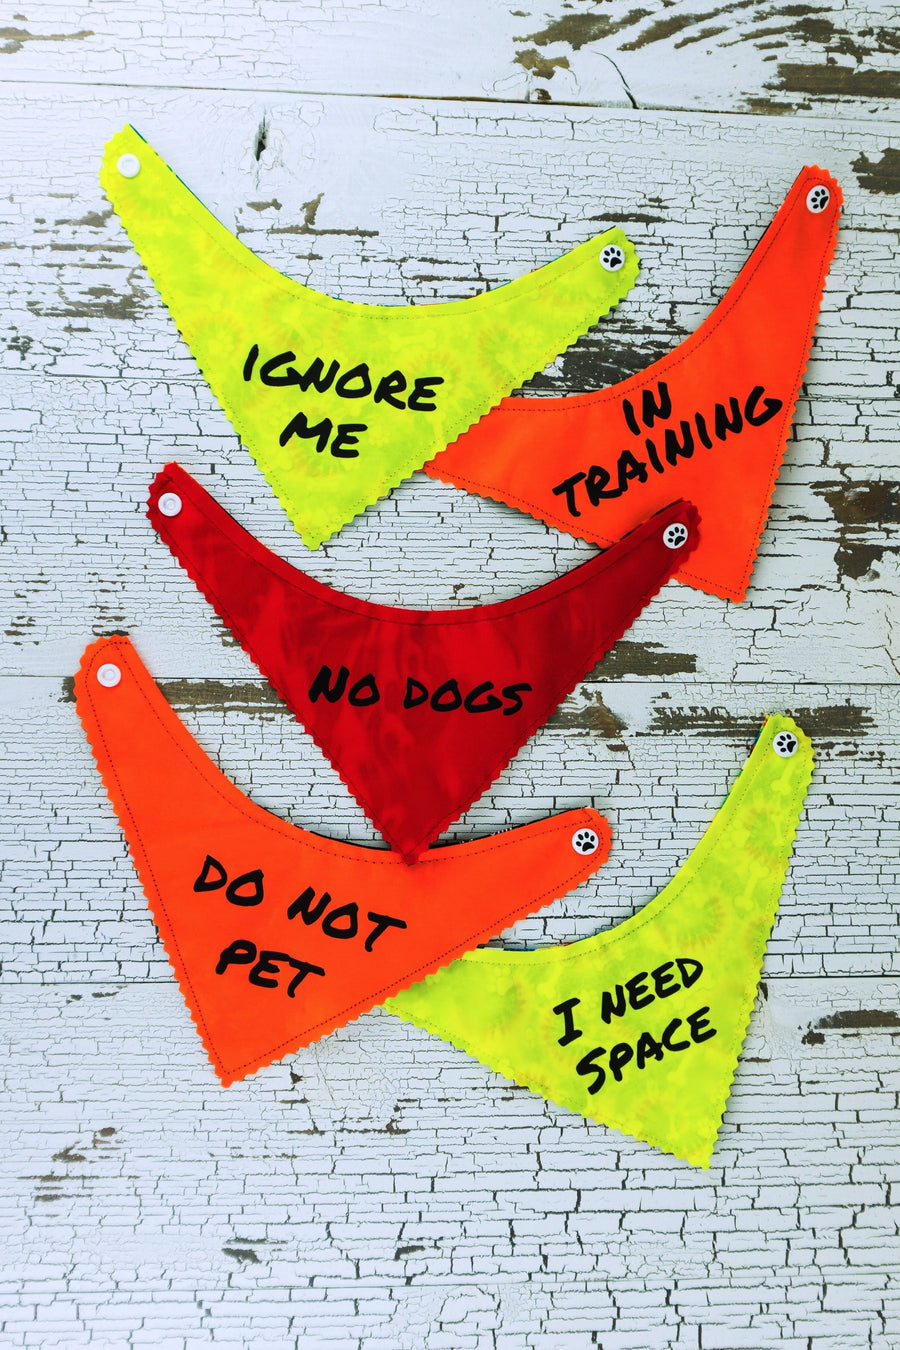 five brightly colored dog bandanas laid flat, displaying messages such as "ignore me", "no dogs", "I need space" and more.